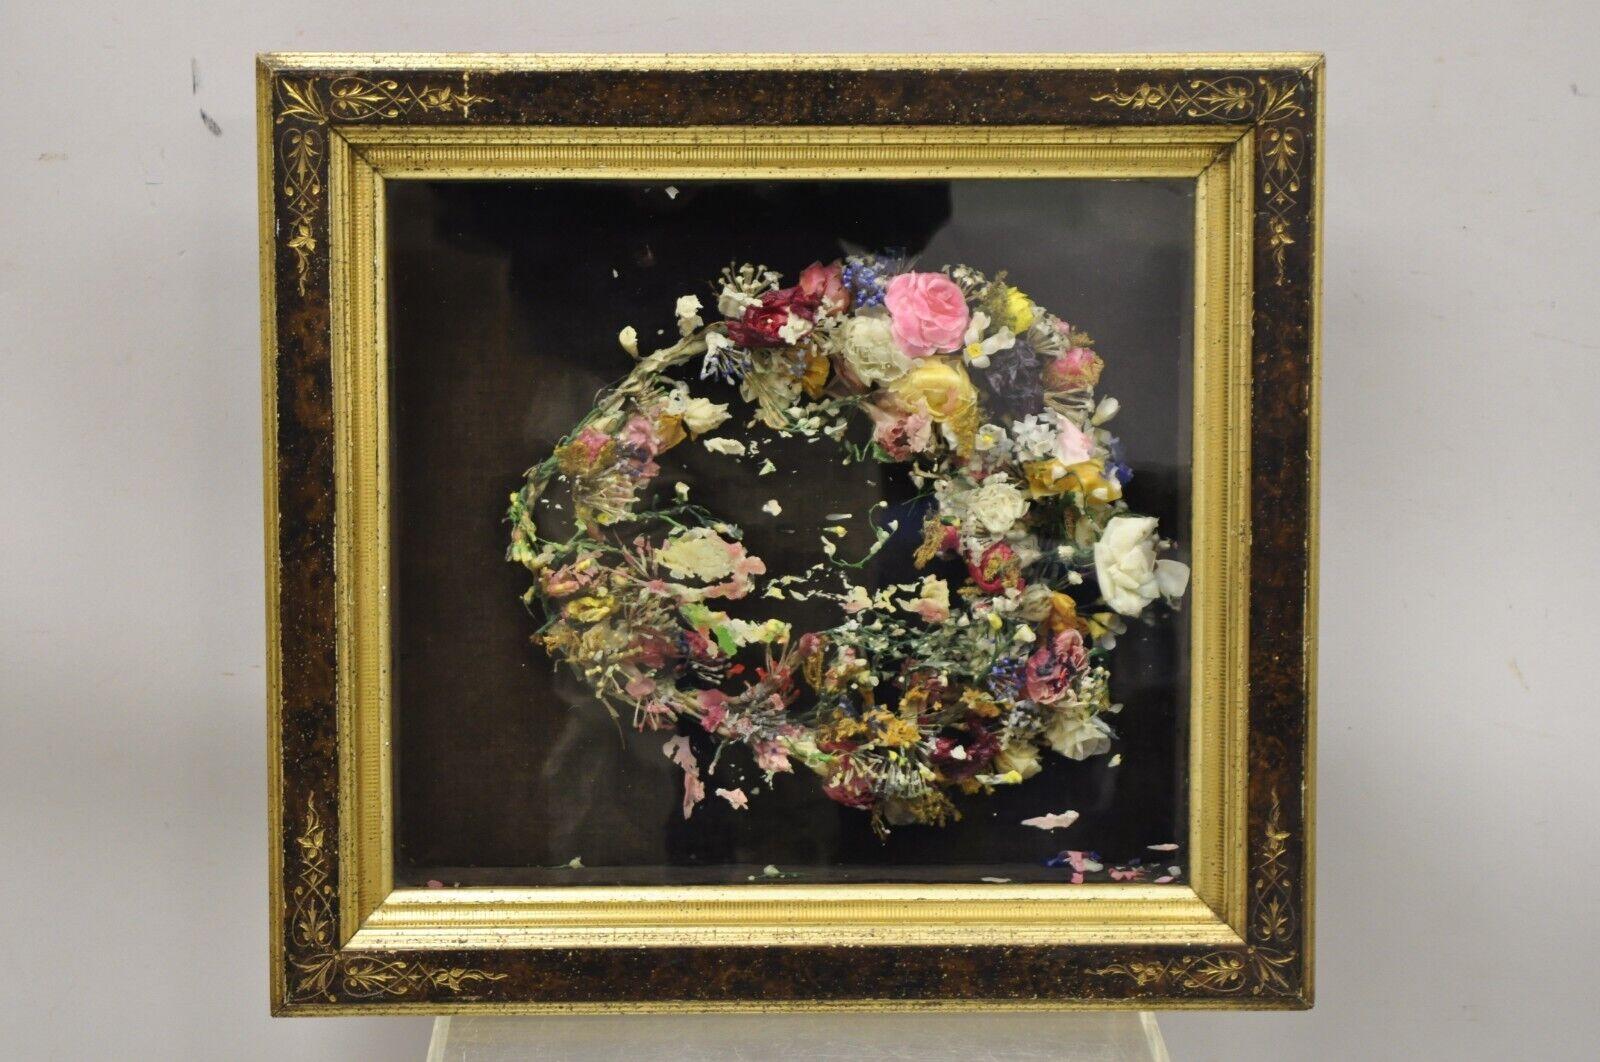 Antique Victorian wax flower floral mourning wreath shadow box frame oddity. Item features a colorful wax flower wreath, gold giltwood shadow box frame with carvings, glass front, very nice antique item. Circa 19th Century. Measurements: 21